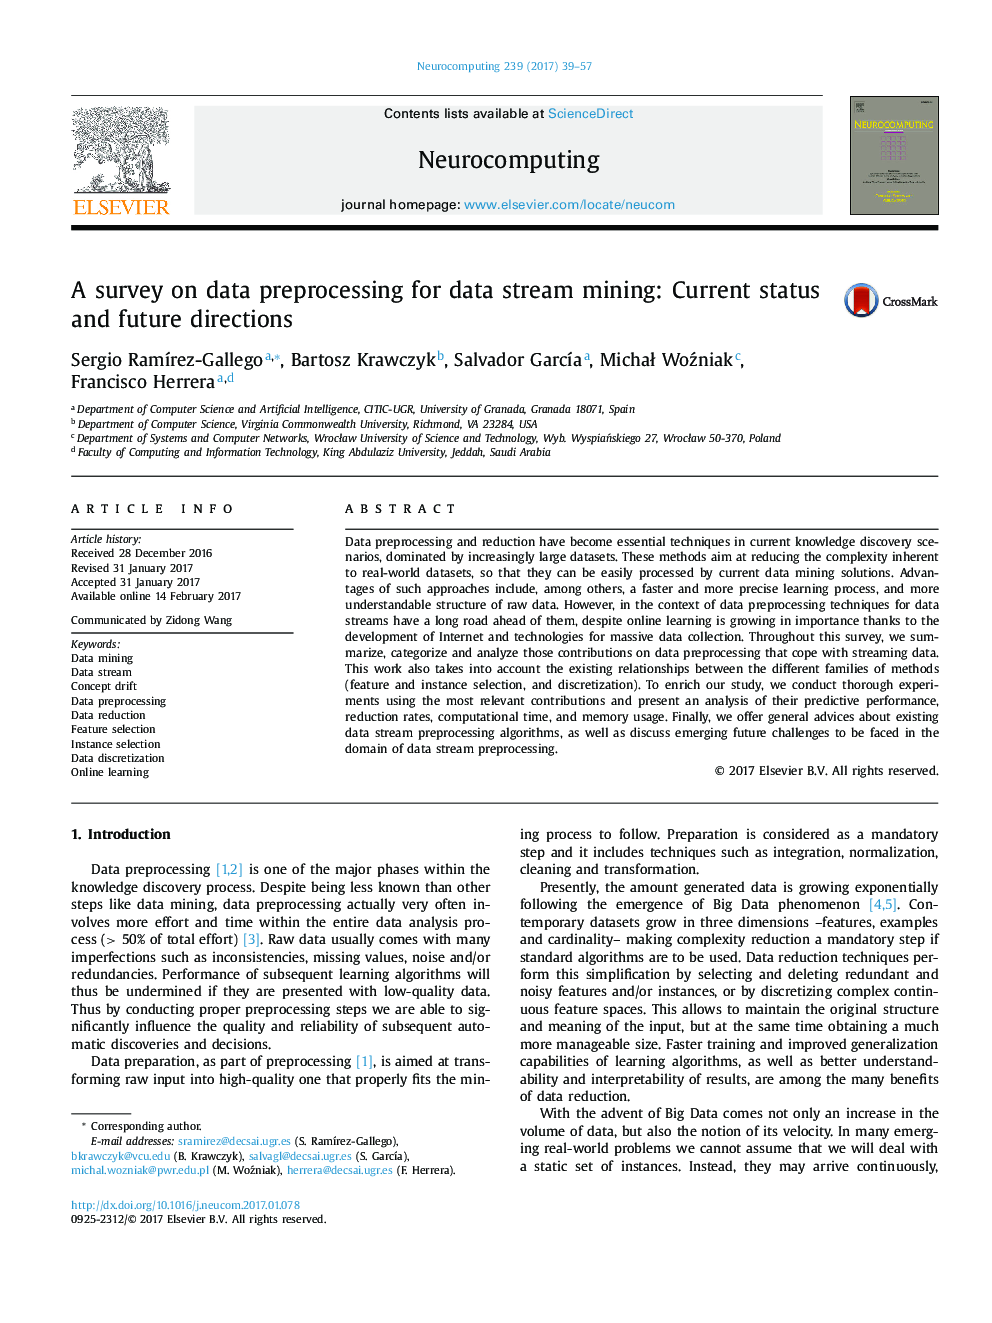 A survey on data preprocessing for data stream mining: Current status and future directions